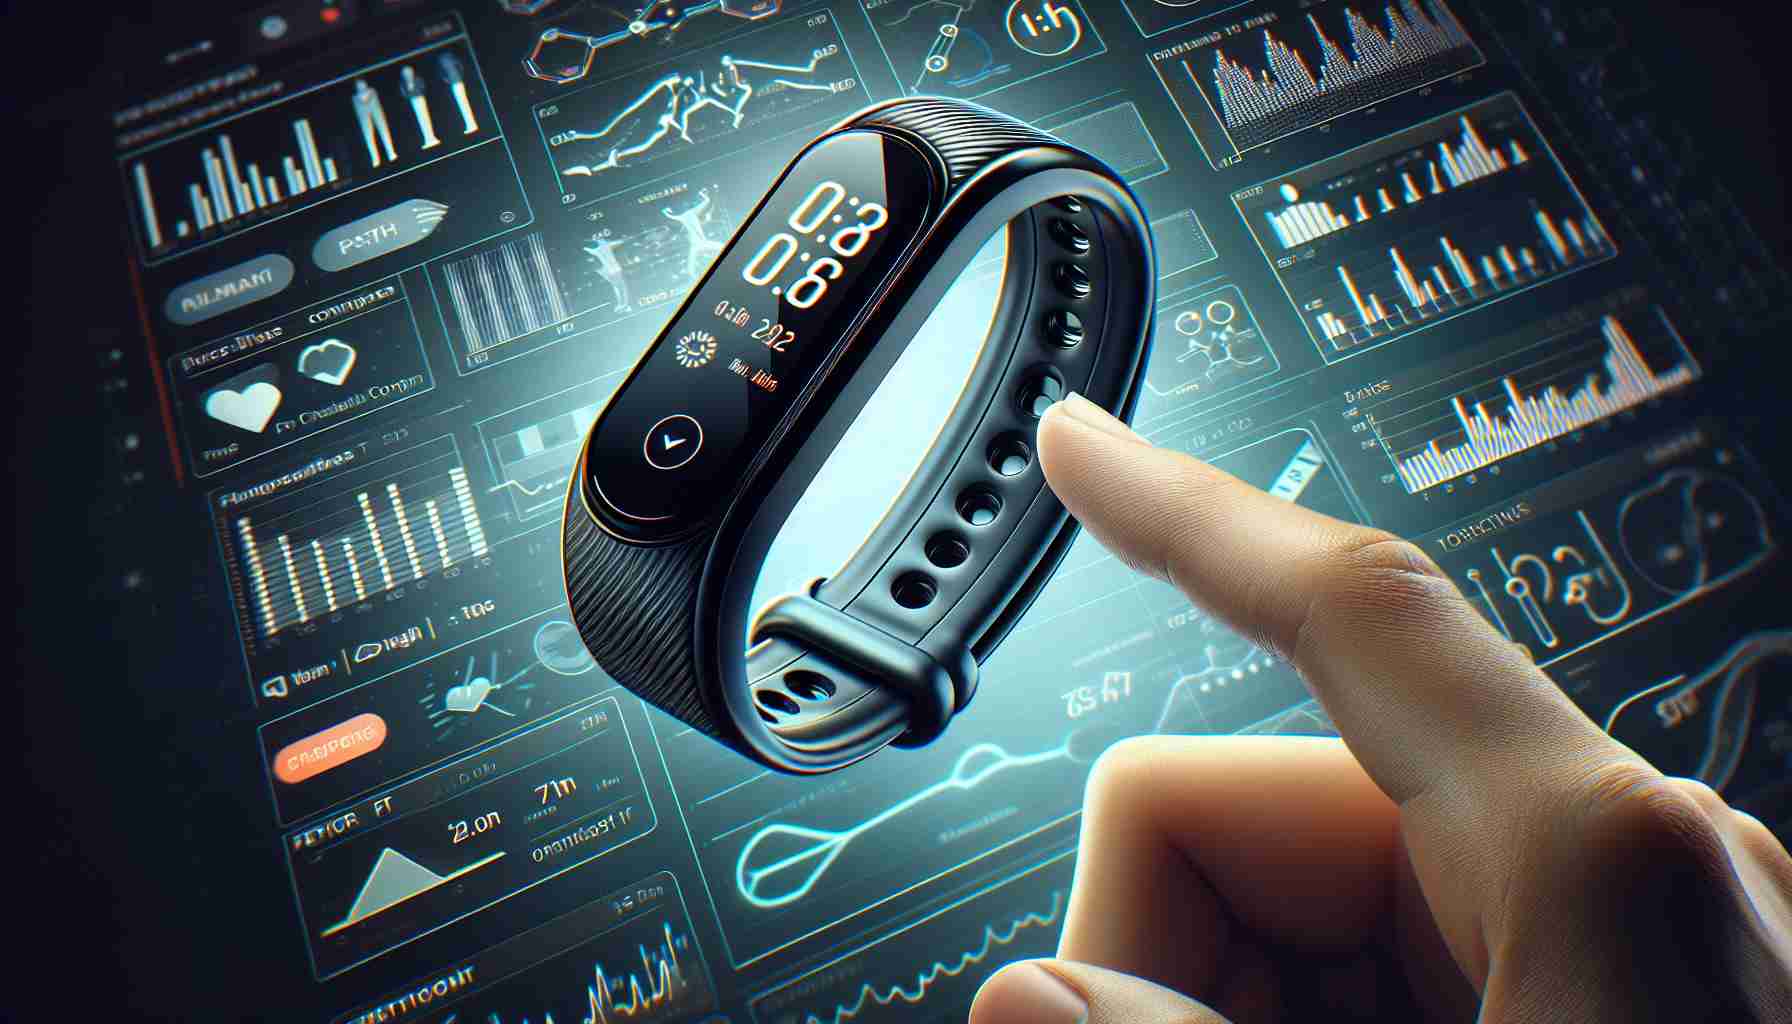 Create a realistic HD image of an innovative fitness tracking gadget called 'Smart Band 8 Active'. This revolutionary device is a game-changer for budget health enthusiasts. The design is sleek, lightweight, and features a screen that displays all the essential metrics in real time. The band's logo, '8 Active', prominently displayed on the gadget, further highlights its exclusive model. It's been launched by a major technology company and has captured the attention of fitness fans around the world for its affordability and cutting-edge features.